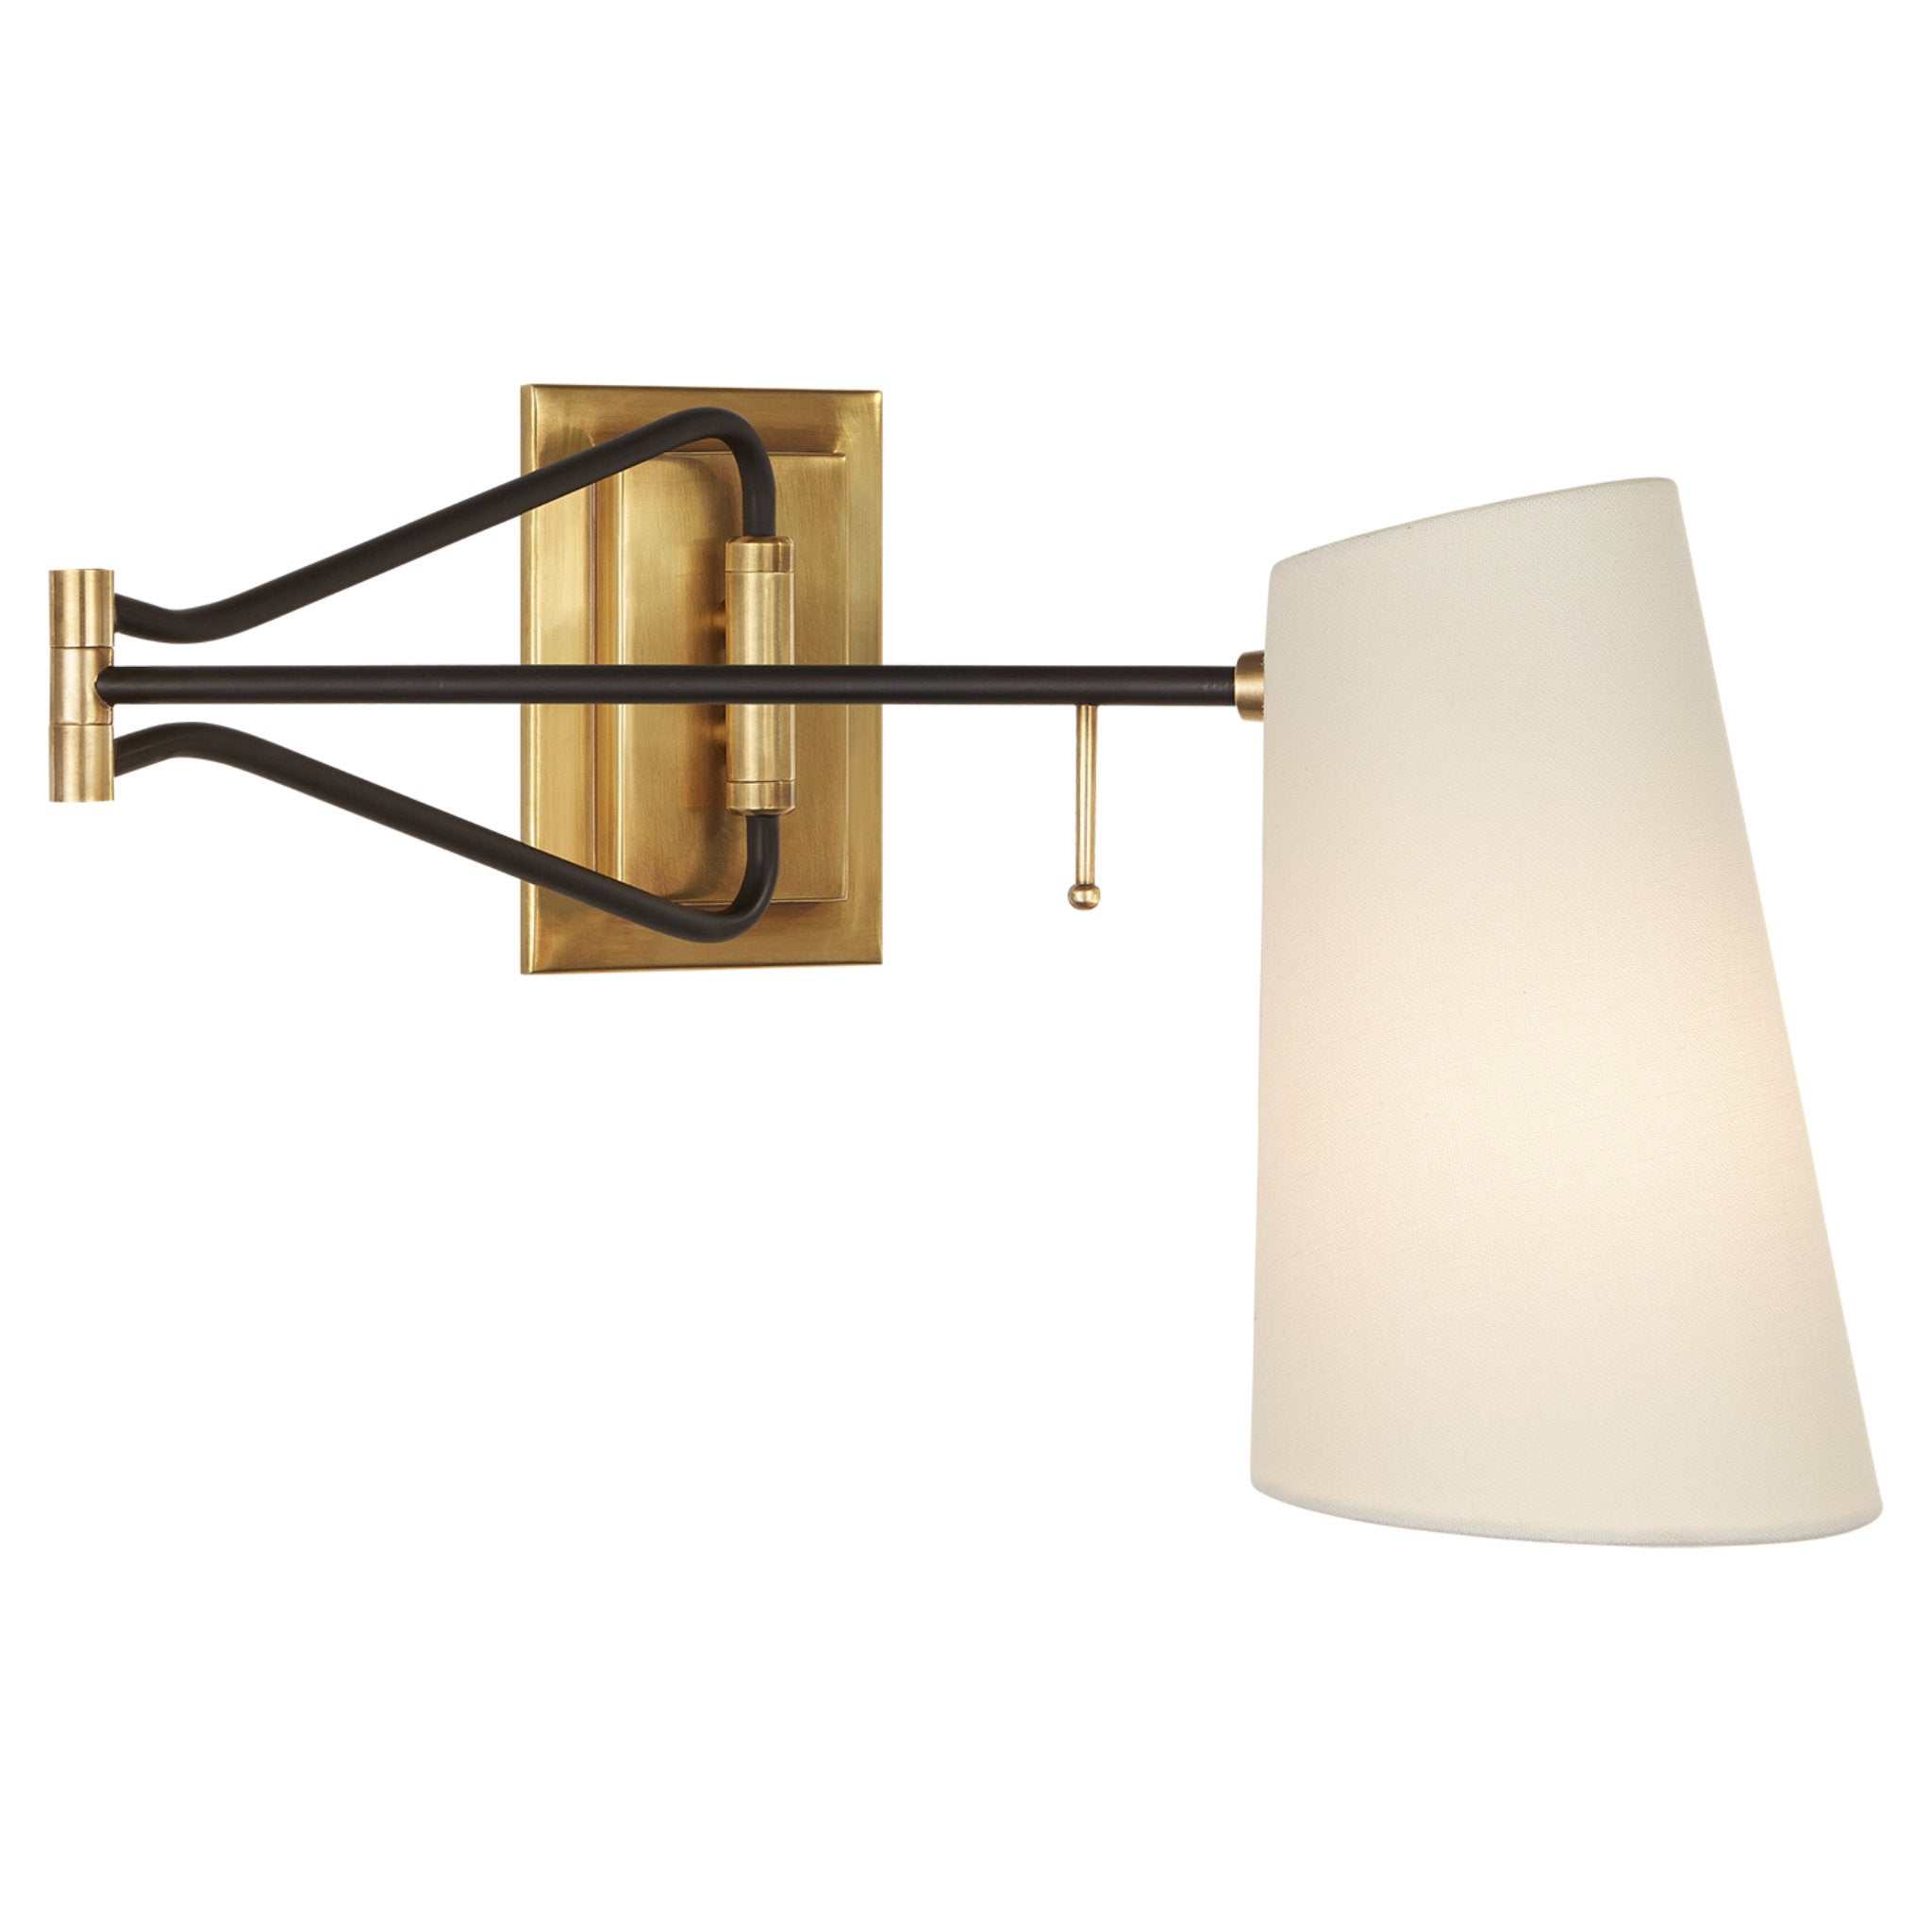 AERIN Keil Swing Arm Wall Light in Hand-Rubbed Antique Brass and Black with Linen Shade